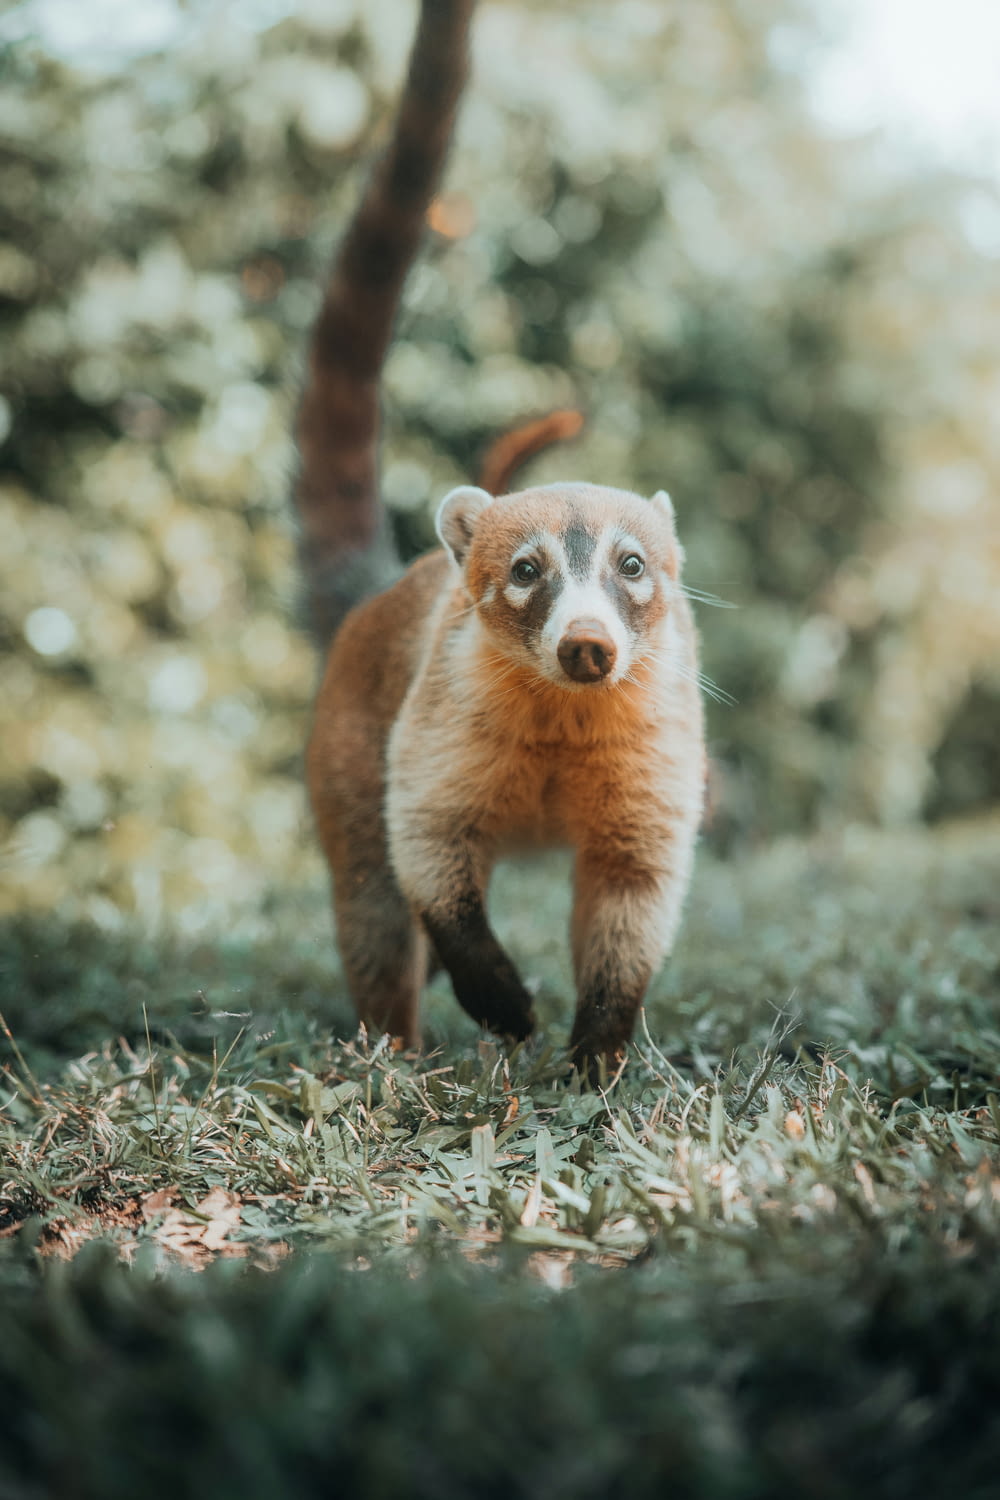 a small animal walking through a lush green forest